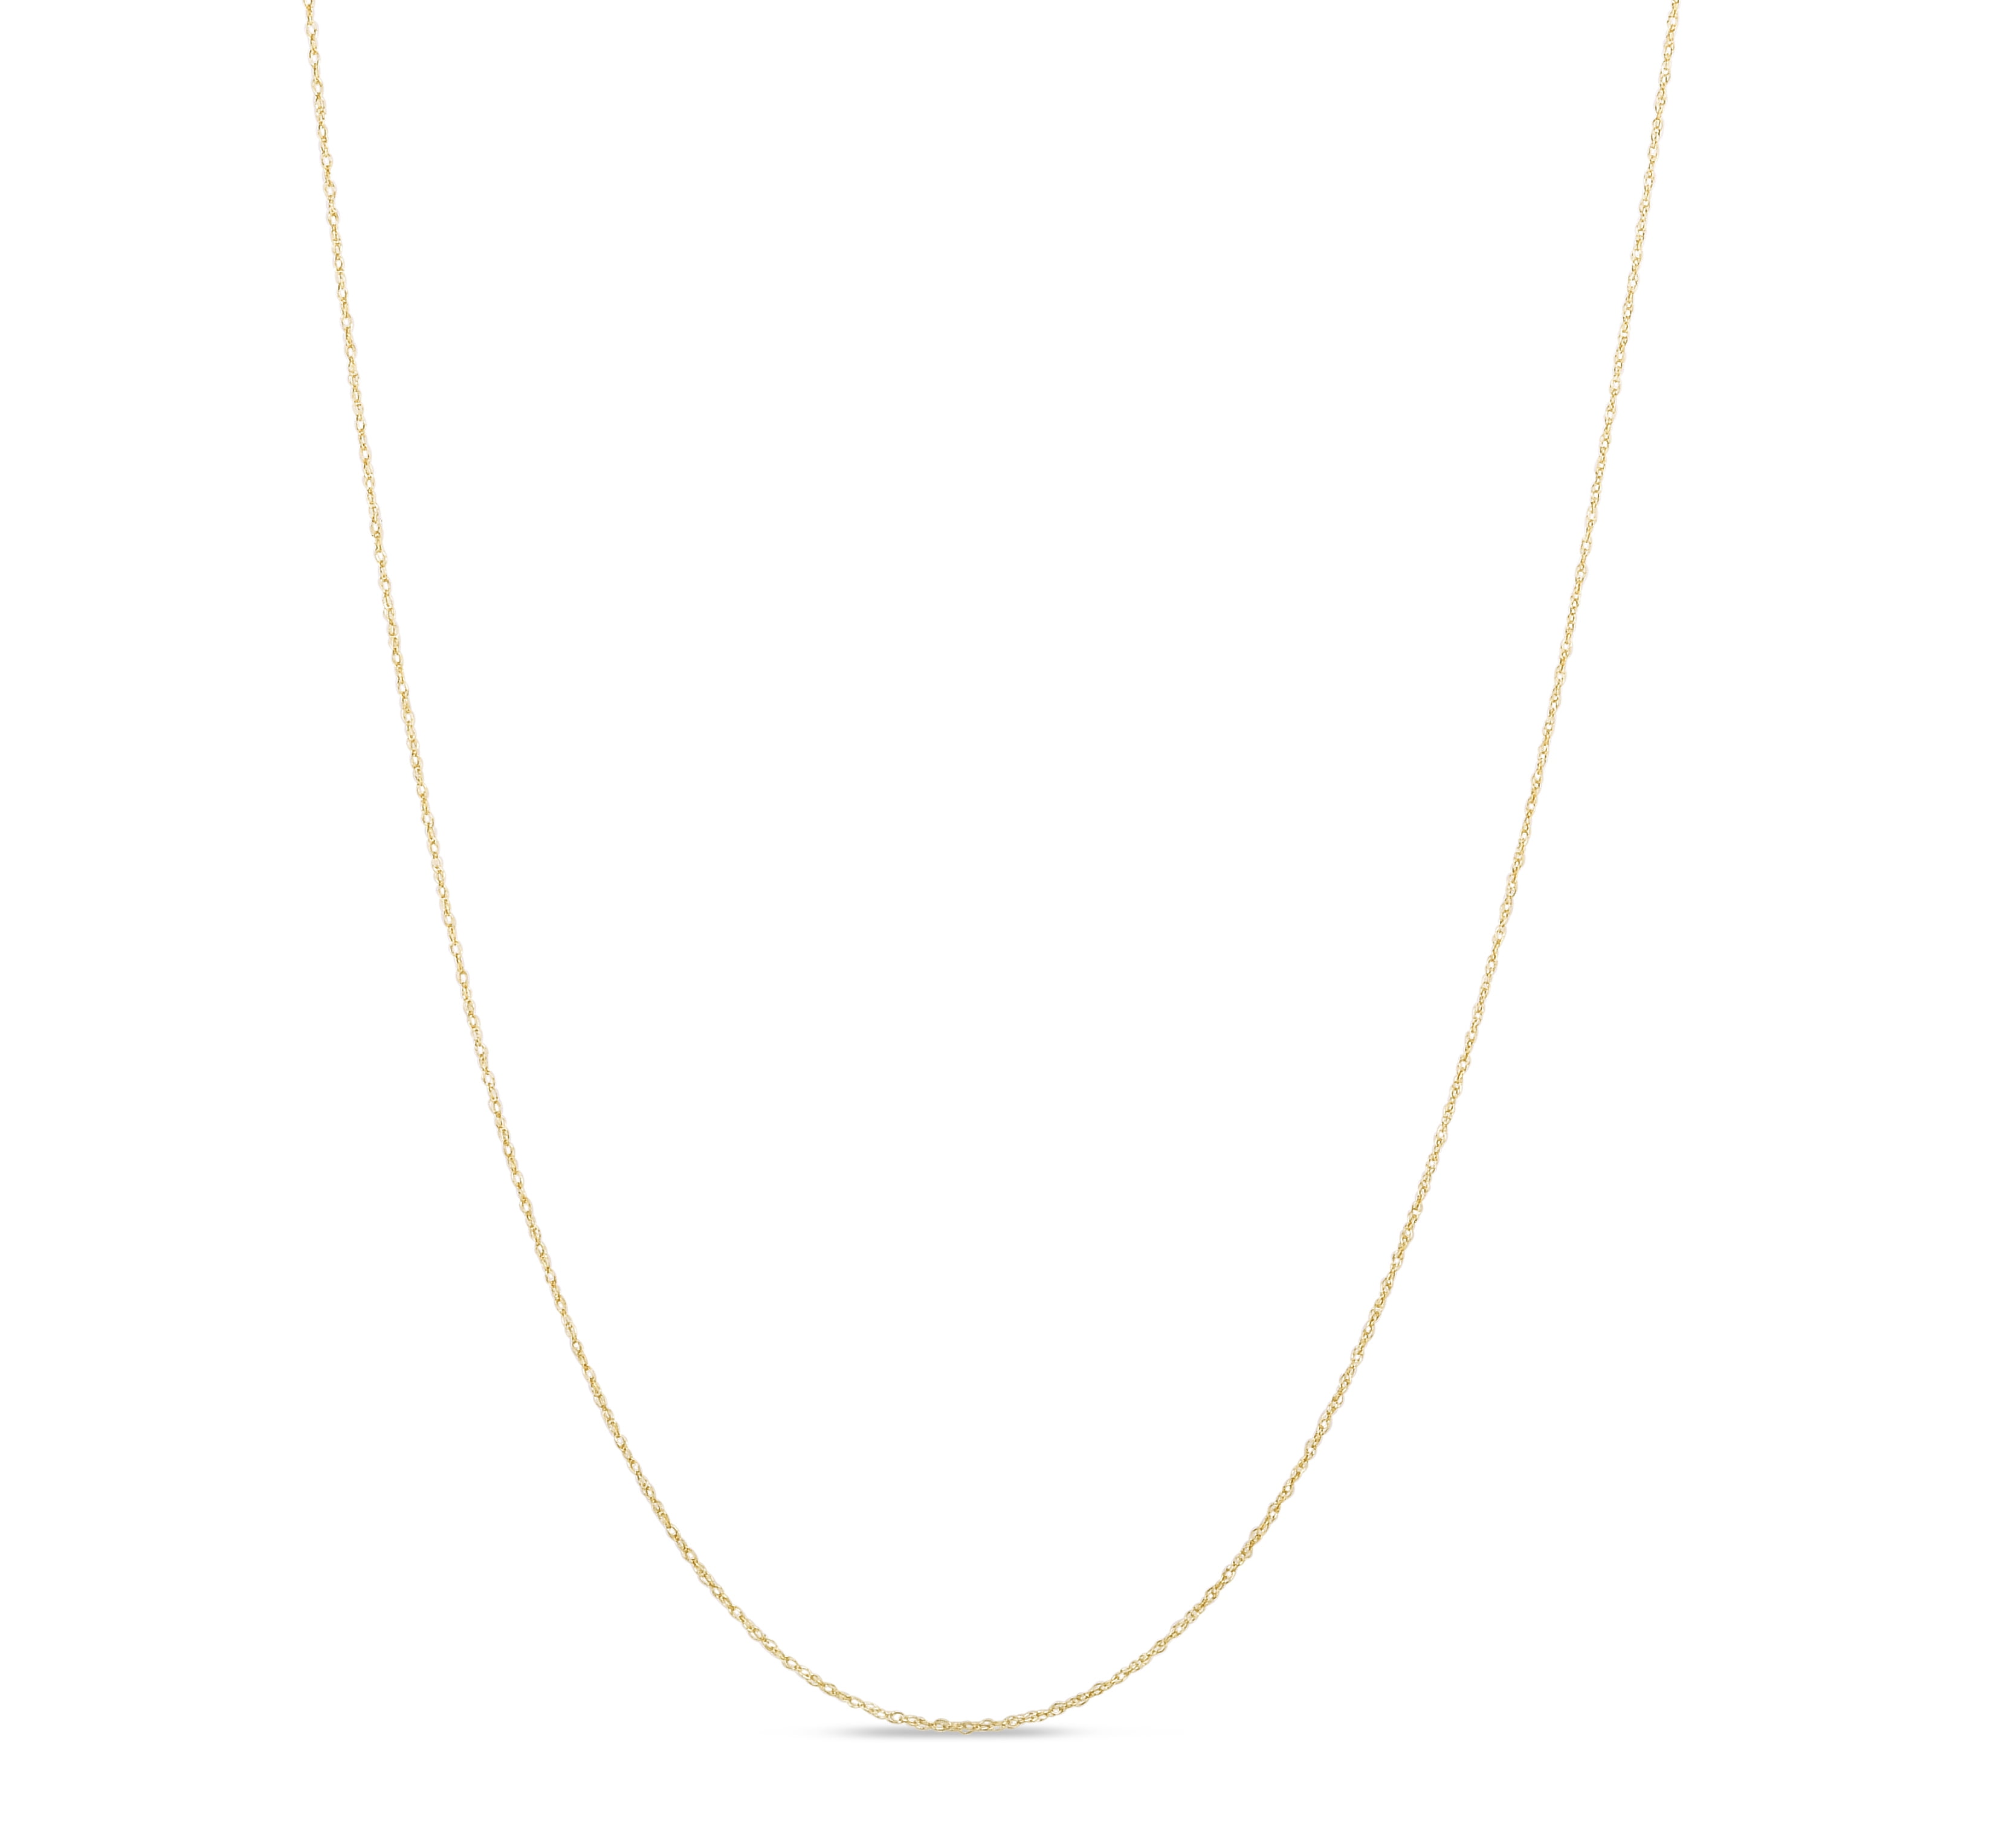 14, 16, 18, 20, 22, 24 or 30 inch Dainty Singapore Chain Necklace 14k Yellow Gold 0.85mm 